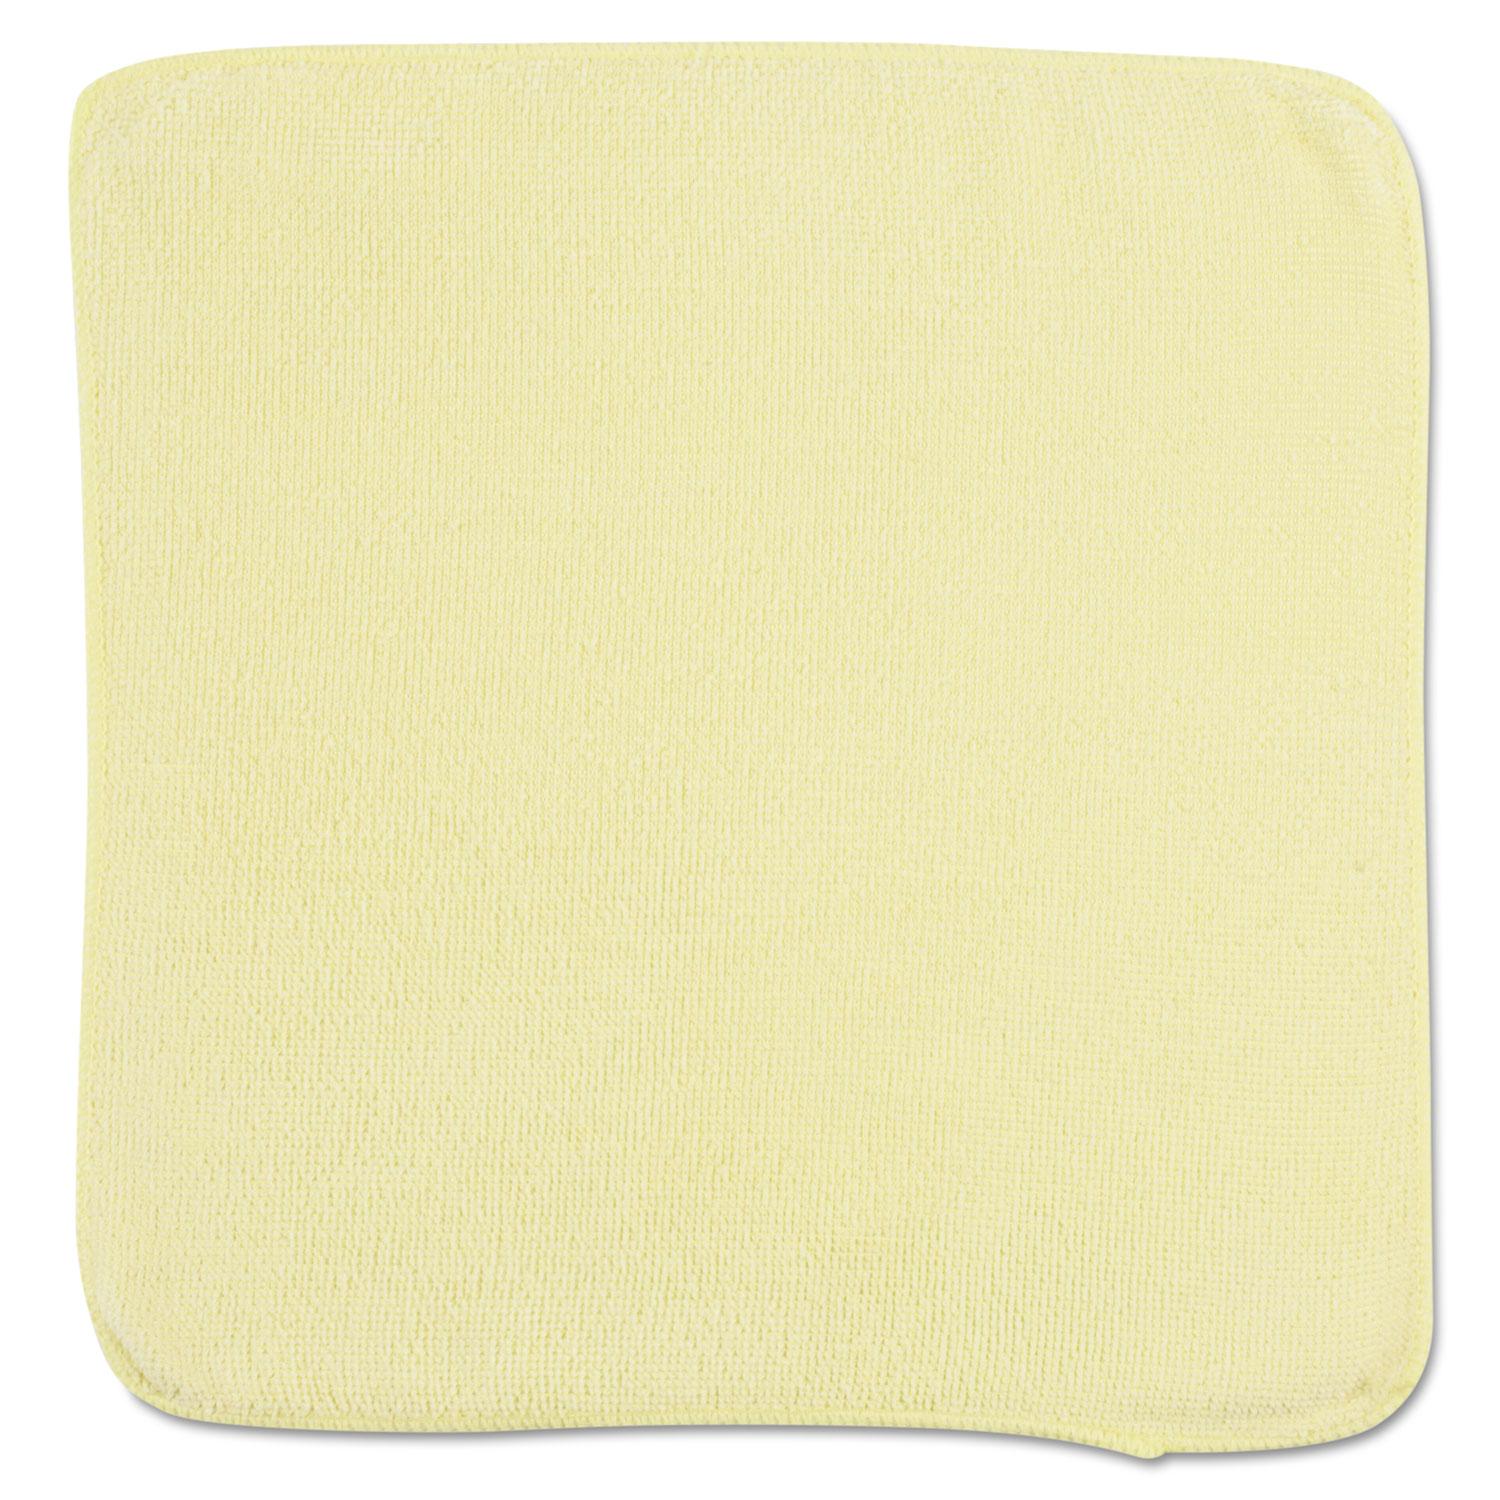 Microfiber Cleaning Cloths, 12 x 12, Yellow, 24/Bag